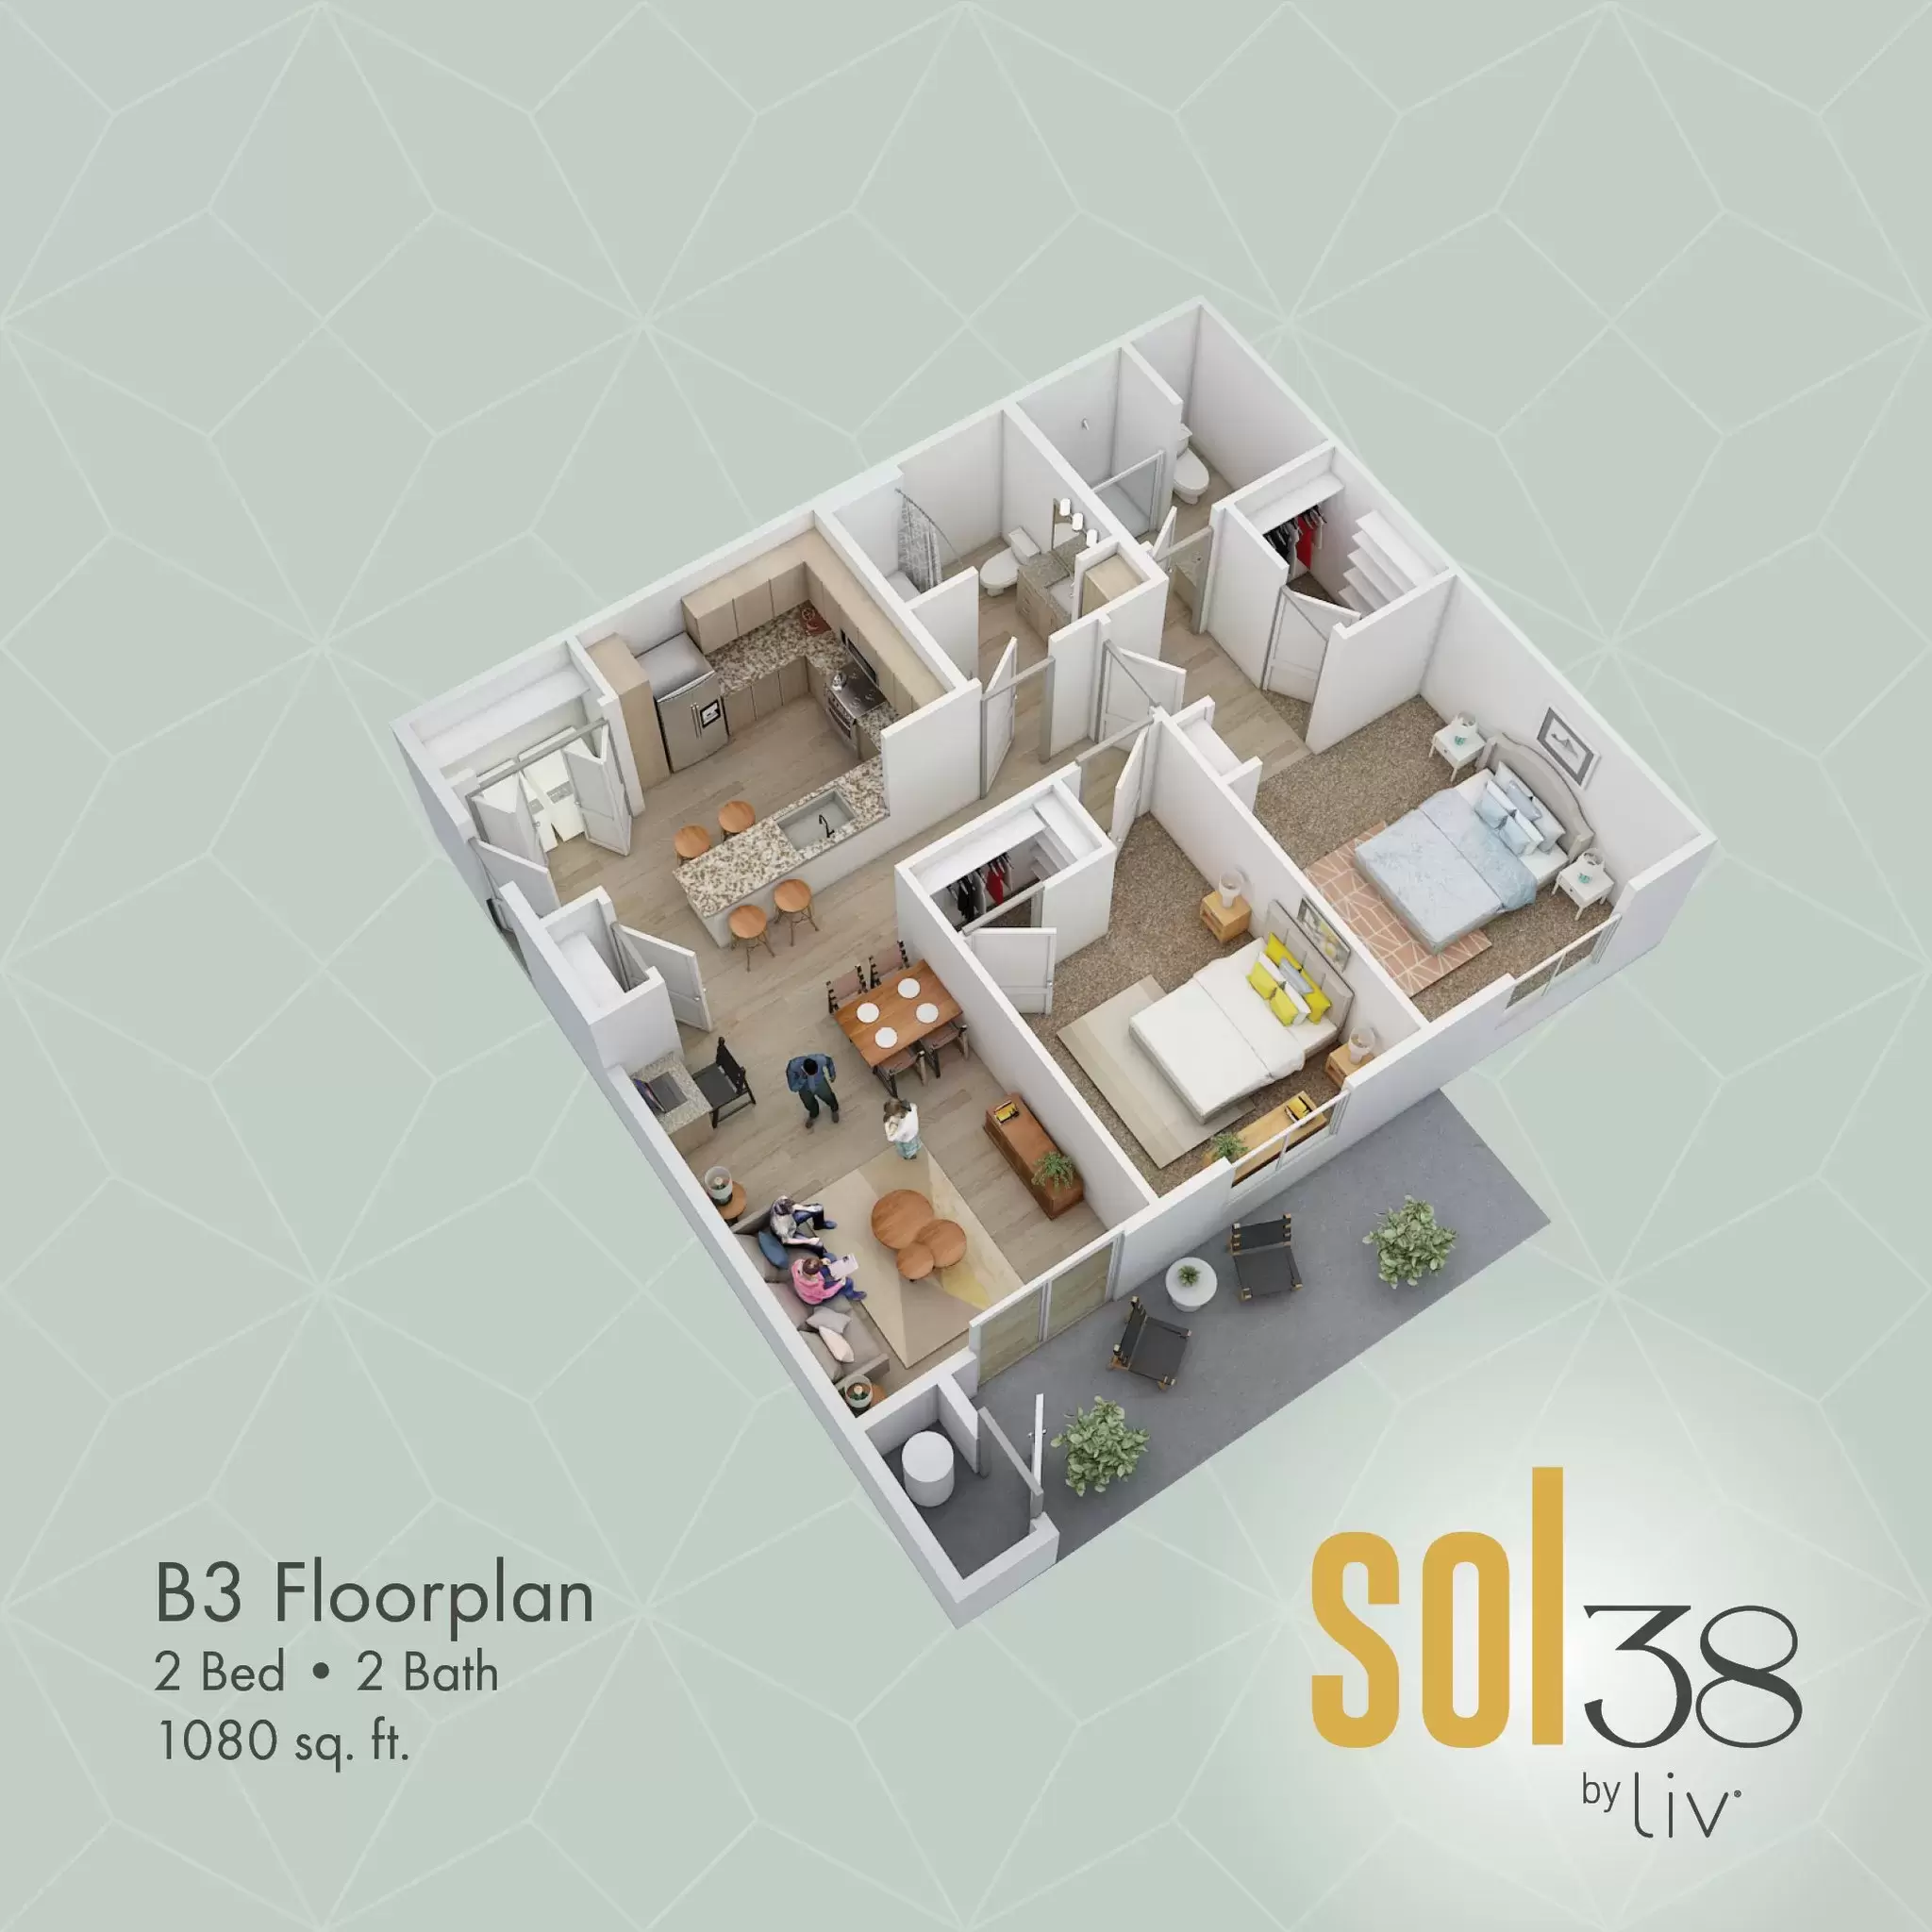 Say Hello to B3 👋
This 2-bedroom, 2-bath residence comes complete with countertop seating, ample storage space, and high-end finishes. Visit our website and explore all of our floor plans! ➡ www.sol38byliv.com